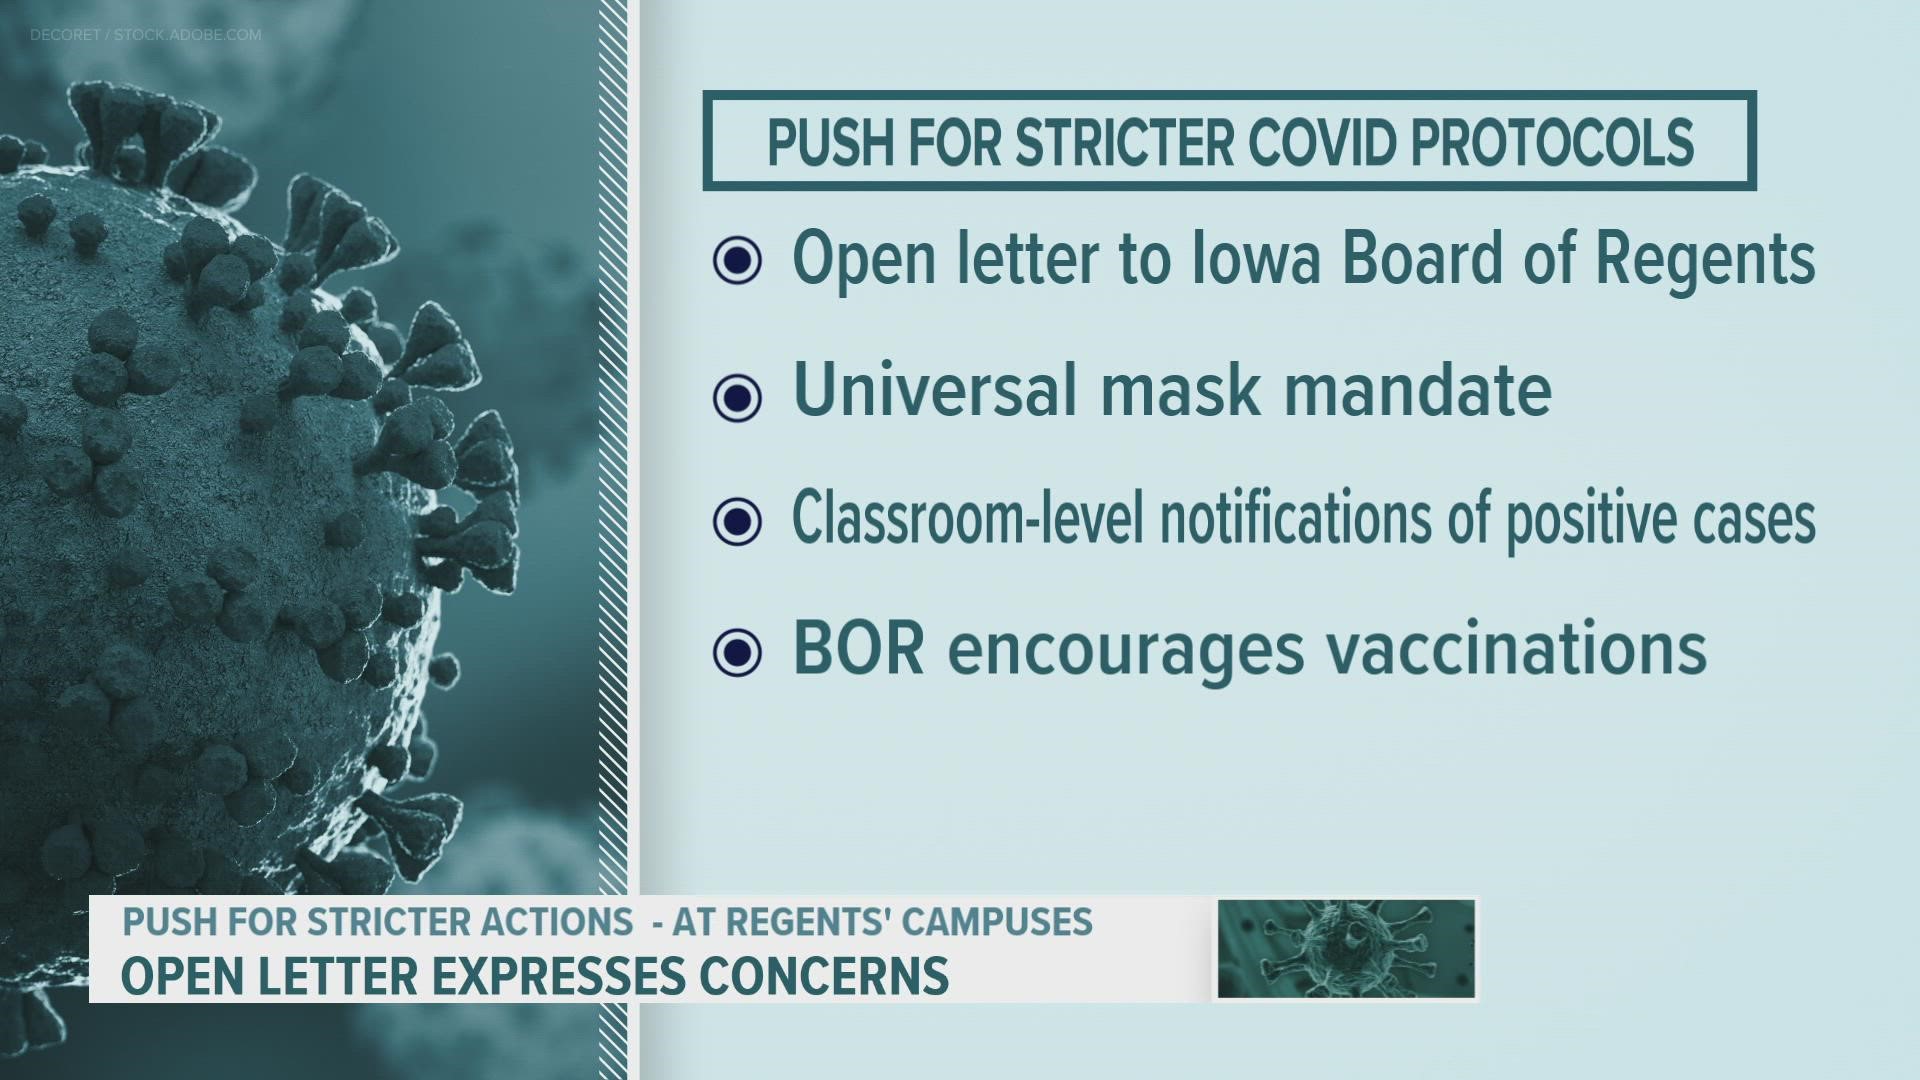 This comes after the board said it would not be changing its COVID guidance for the upcoming semester.